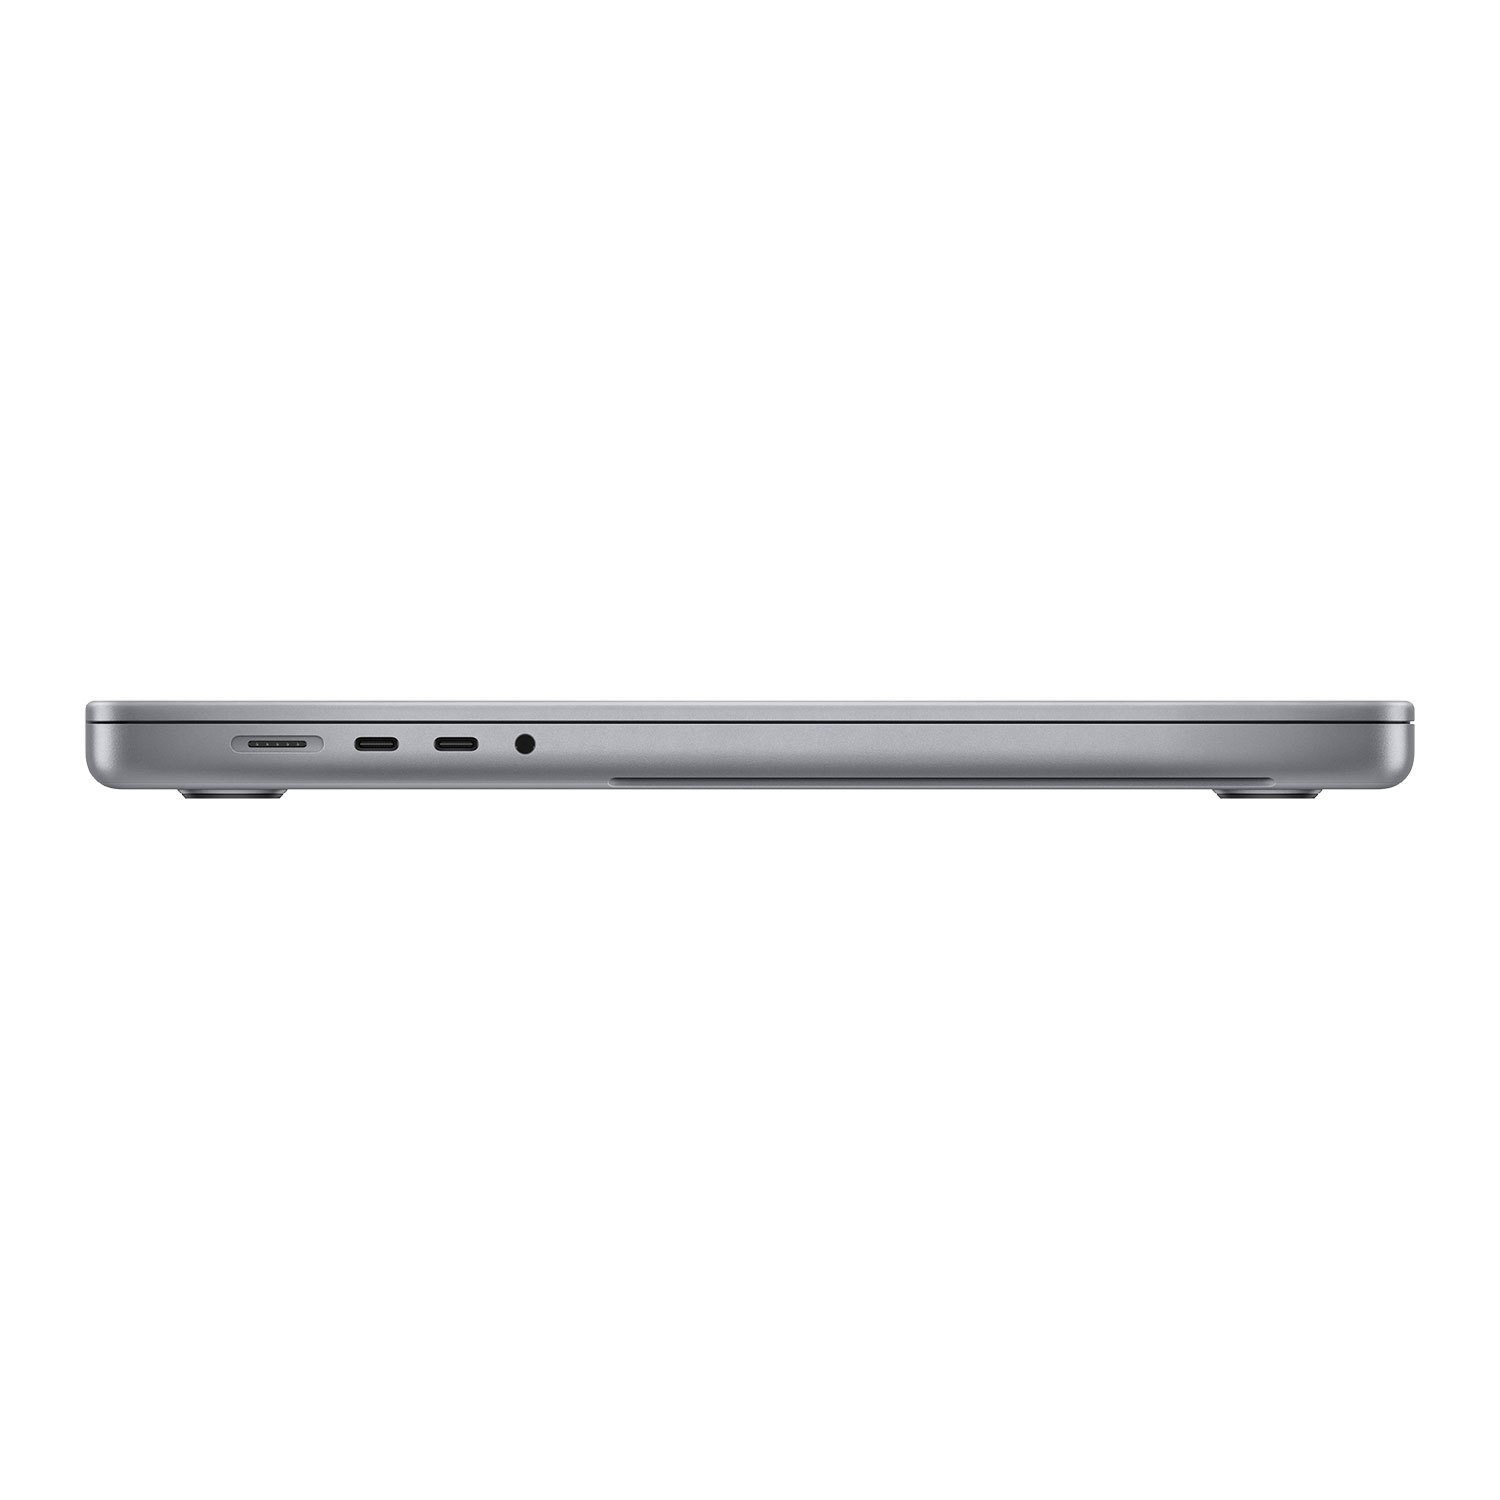 Apple MacBook Pro 16 (512GB SSD, M1 Pro, 16GB) Laptop - Space Gray -  MK183LL/A (October, 2021) for sale online